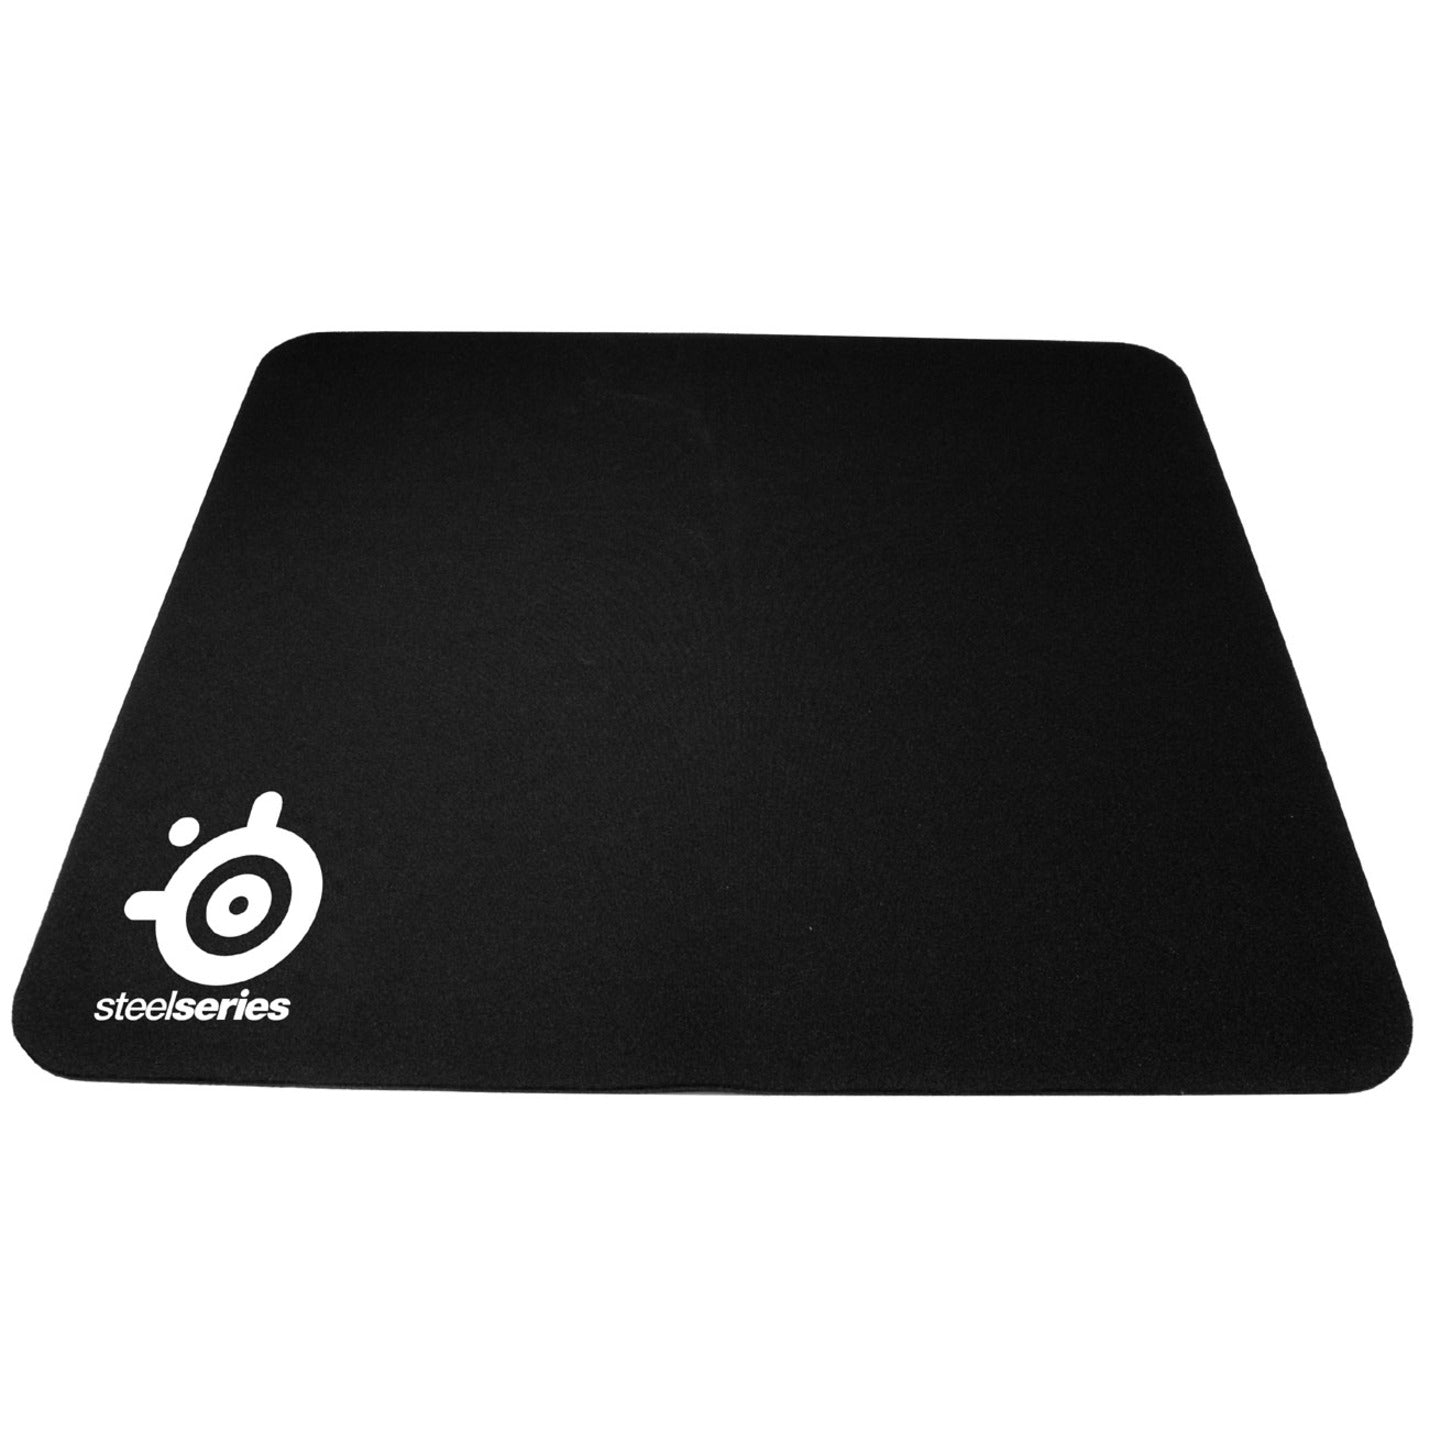 SteelSeries 63004 QcK Mouse Pad, 12.6" x 11.22", Black Rubber Surface